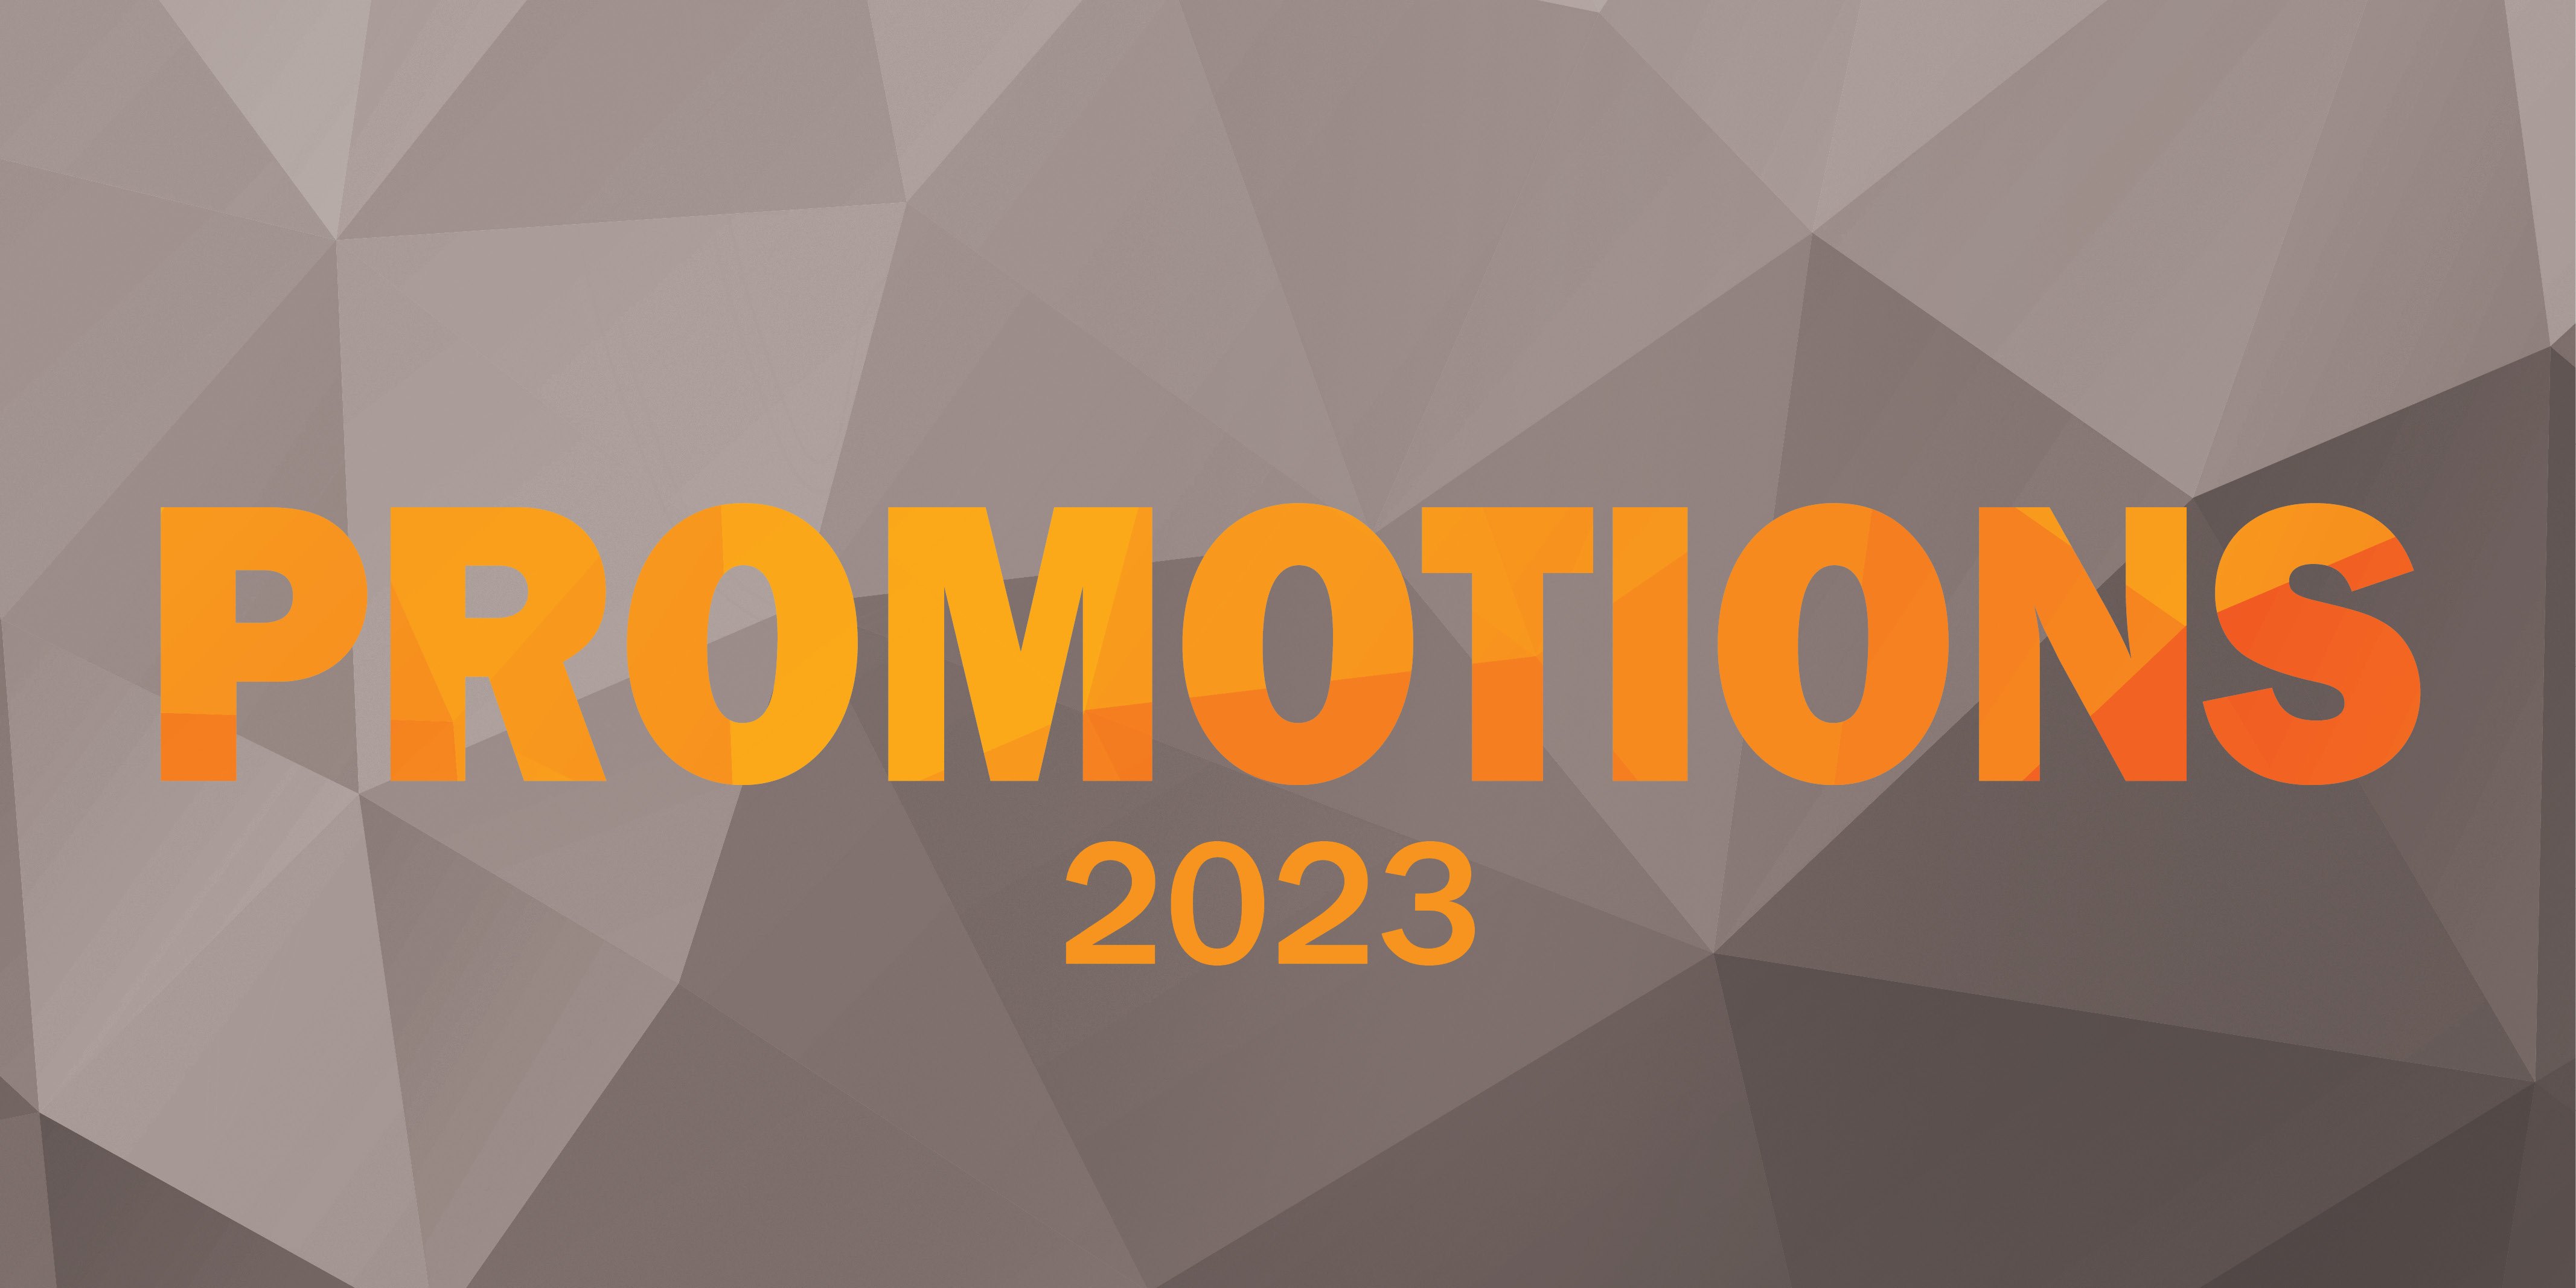 Congratulations to Our Staff Receiving Promotions in 2023